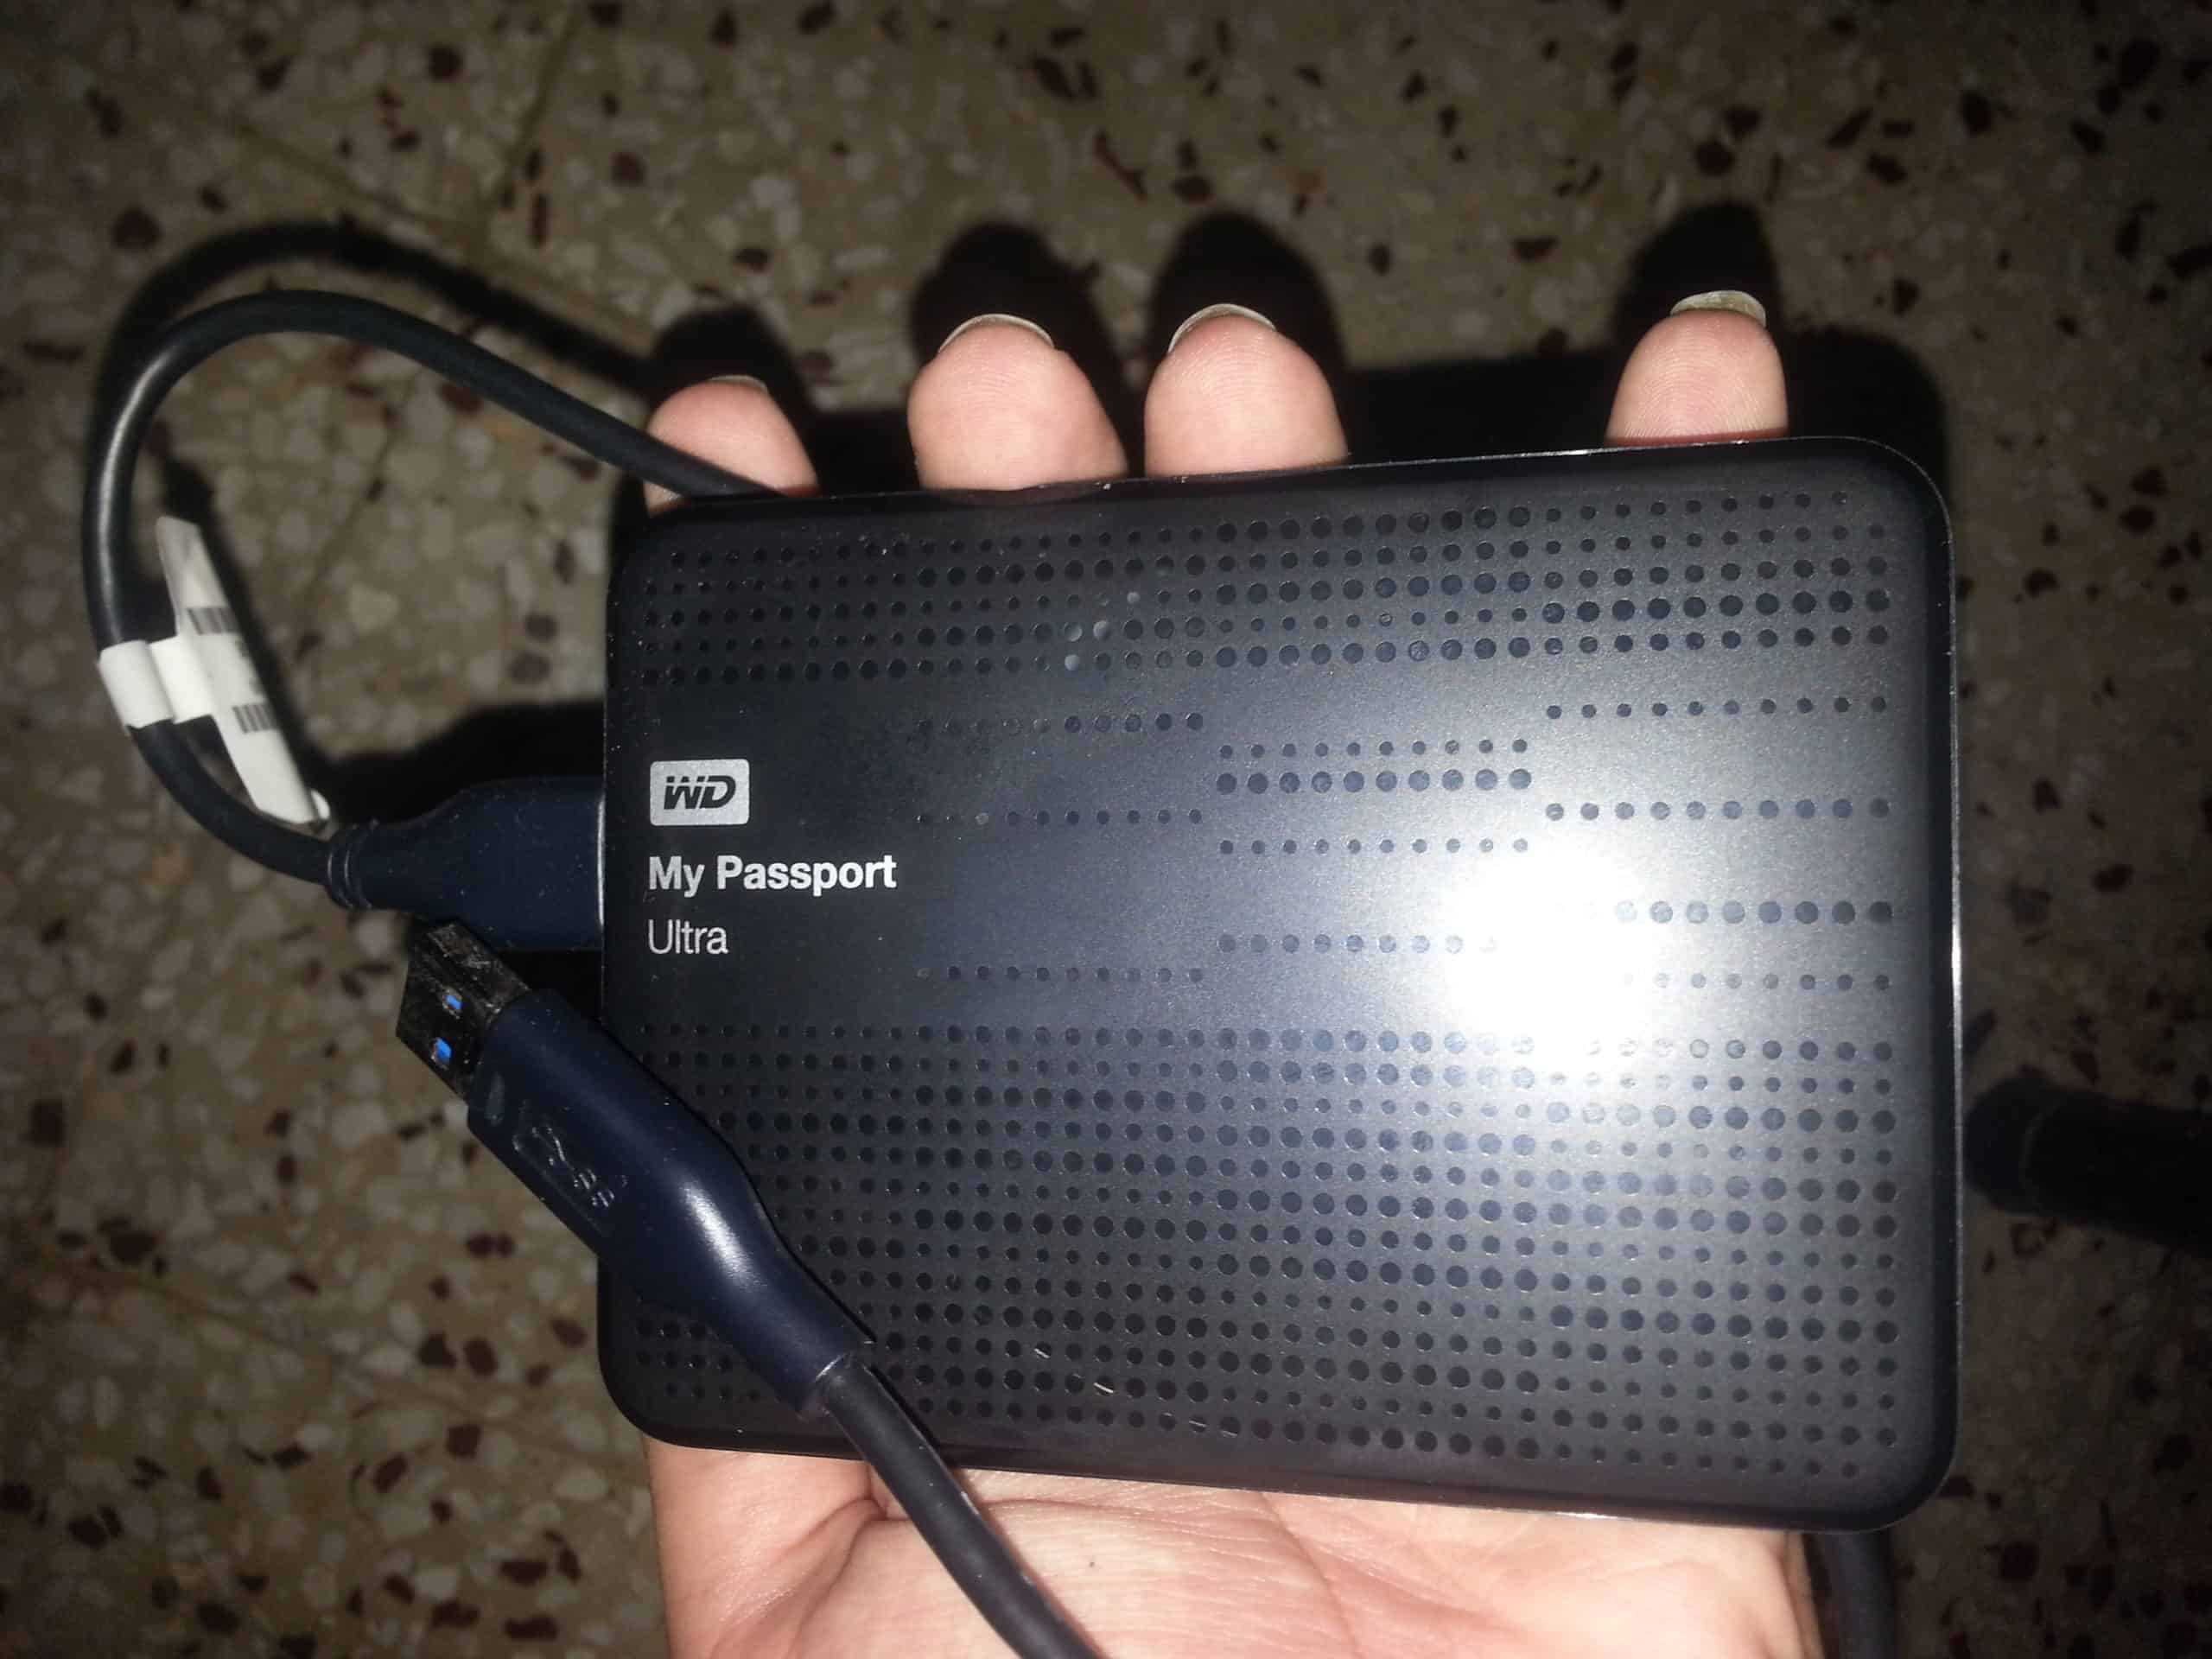 Western digital elements vs my passport, which one is better?